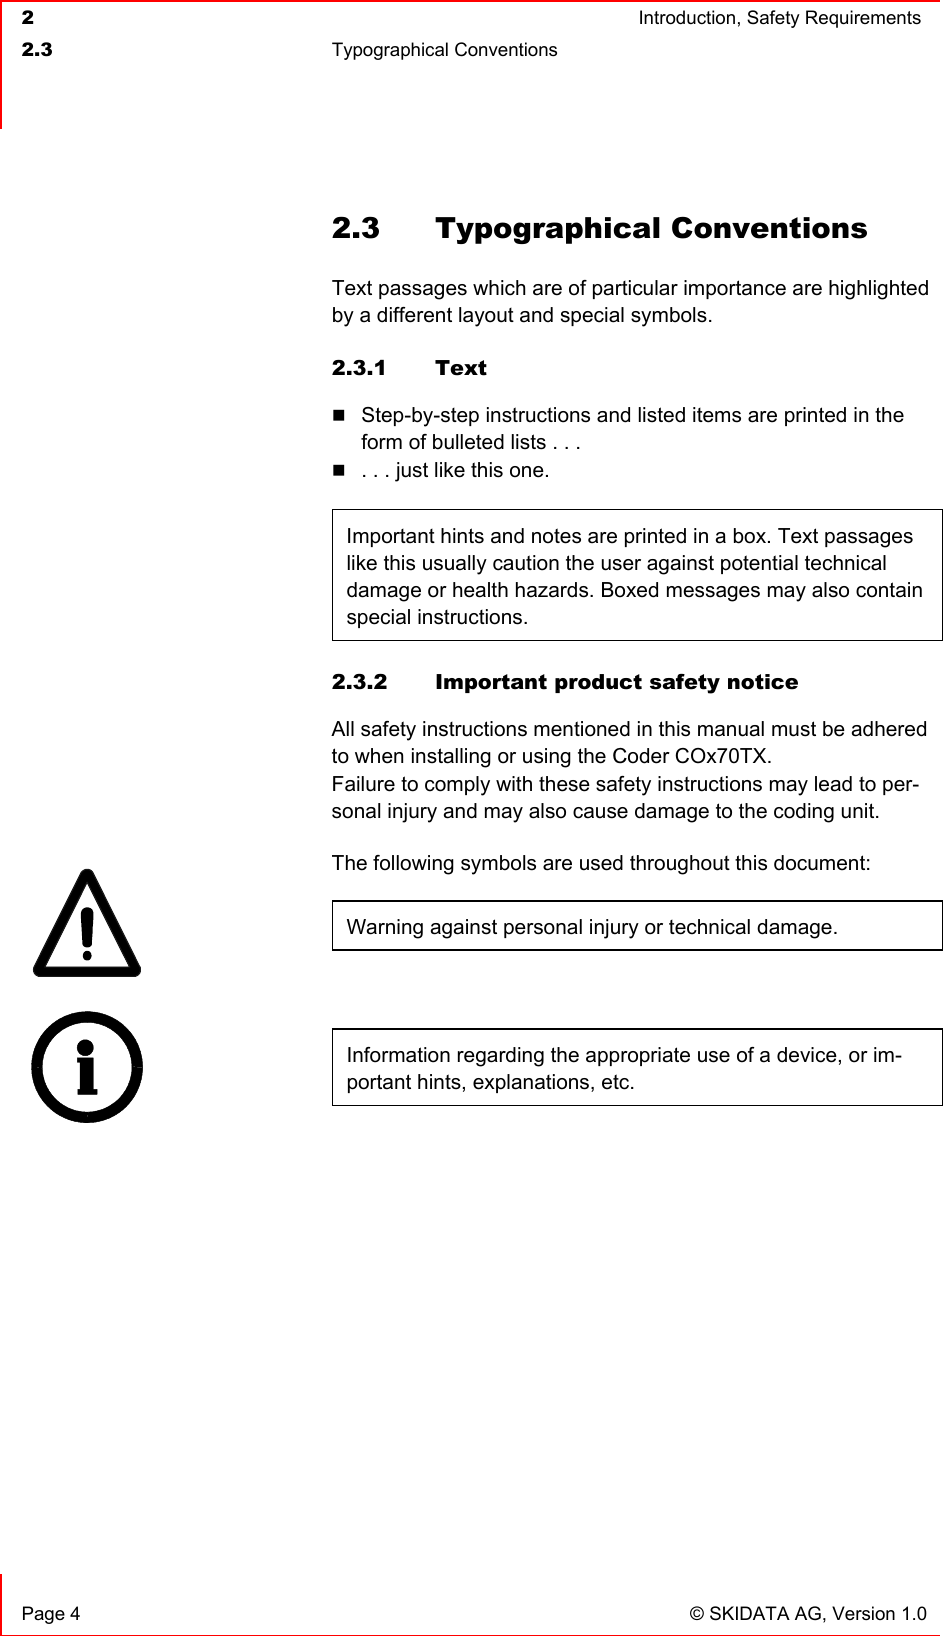  2  Introduction, Safety Requirements  2.3 Typographical Conventions    Page 4  © SKIDATA AG, Version 1.0 2.3 Typographical Conventions Text passages which are of particular importance are highlighted by a different layout and special symbols. 2.3.1 Text  Step-by-step instructions and listed items are printed in the form of bulleted lists . . .  . . . just like this one.  Important hints and notes are printed in a box. Text passages like this usually caution the user against potential technical damage or health hazards. Boxed messages may also contain special instructions.  2.3.2  Important product safety notice All safety instructions mentioned in this manual must be adhered to when installing or using the Coder COx70TX. Failure to comply with these safety instructions may lead to per-sonal injury and may also cause damage to the coding unit. The following symbols are used throughout this document: Warning against personal injury or technical damage.  Information regarding the appropriate use of a device, or im-portant hints, explanations, etc. 